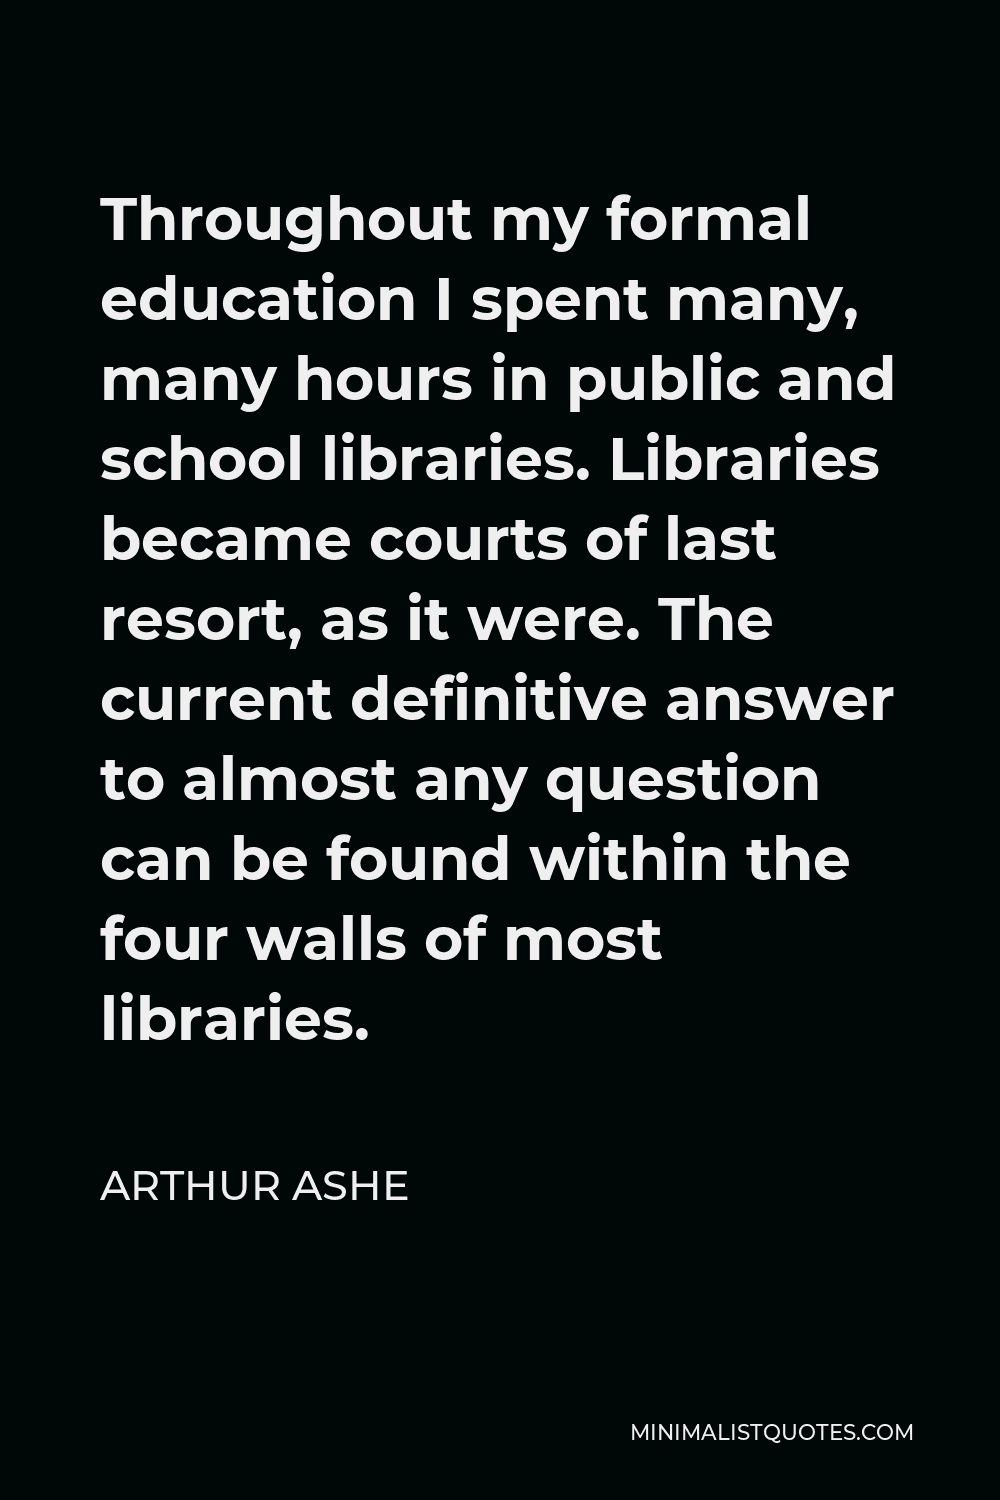 Arthur Ashe Quote - Throughout my formal education I spent many, many hours in public and school libraries. Libraries became courts of last resort, as it were. The current definitive answer to almost any question can be found within the four walls of most libraries.